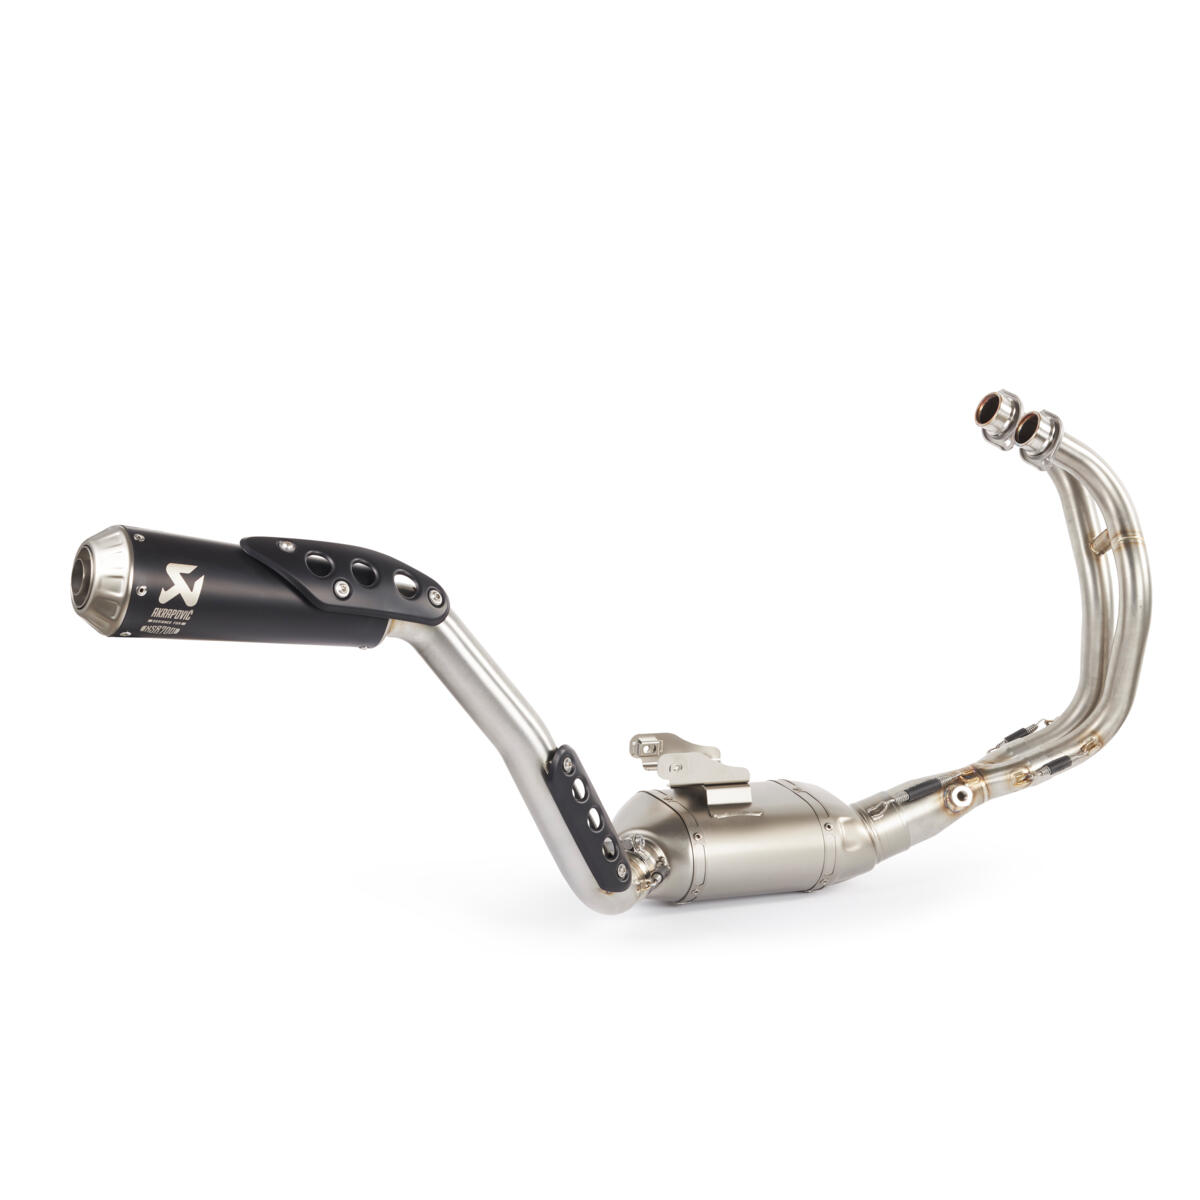 Stylish adjustment on your XSR700 / XTribute. Designed for those riders that demand maximum performance from their motorcycle. This exhaust system combines increased engine performance with an exciting sound output.